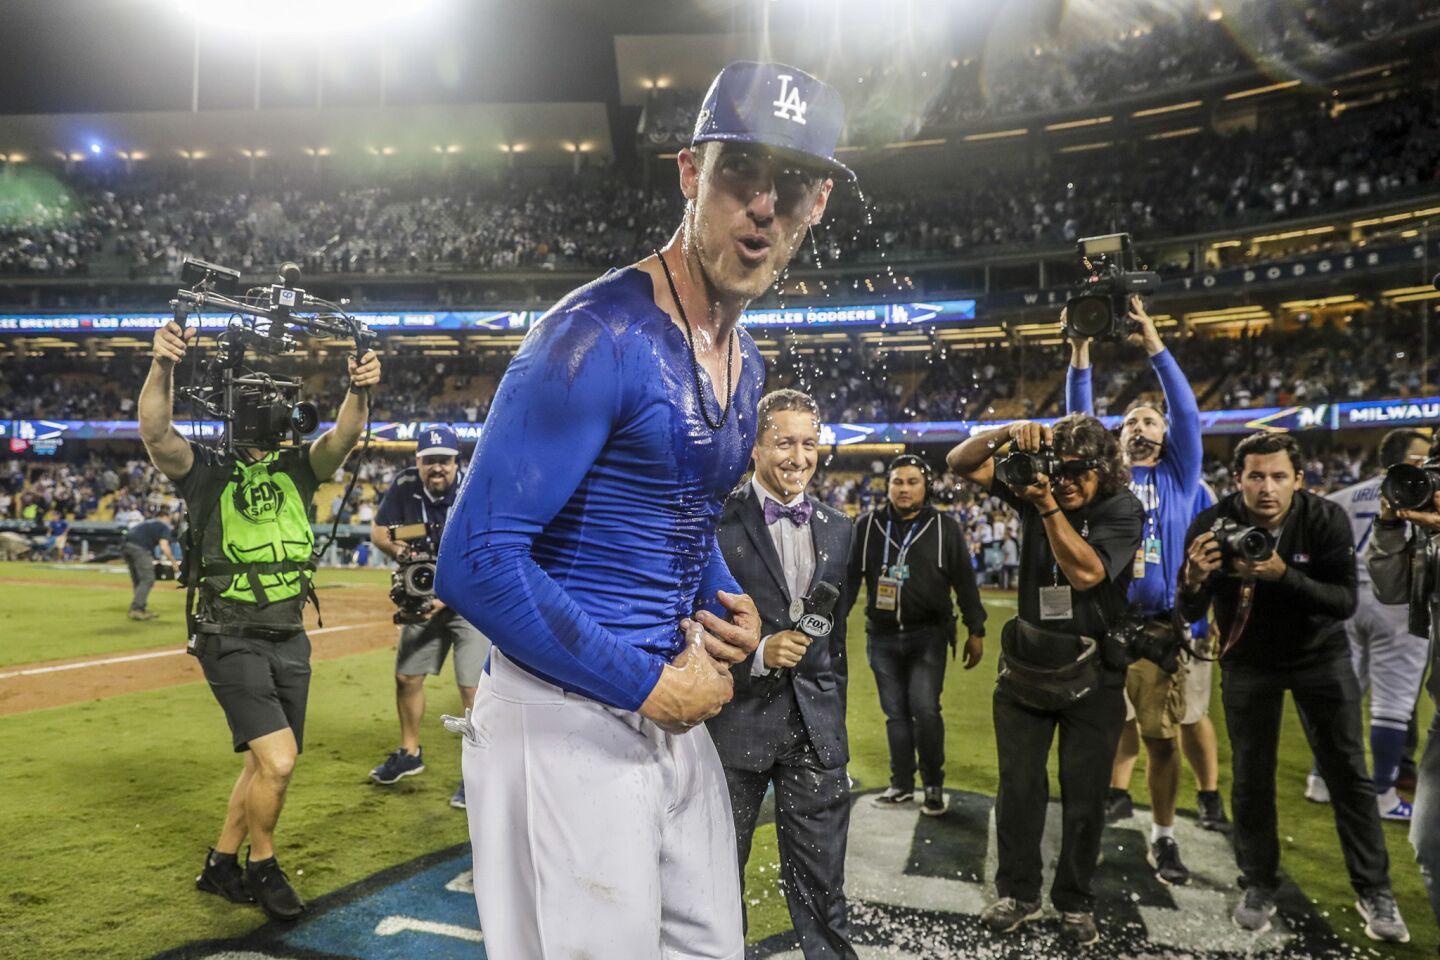 Cody Bellinger recoils after a dousing of gatorade after hitting the game winning single to beat the Brewers 2-1 in 13 innings.